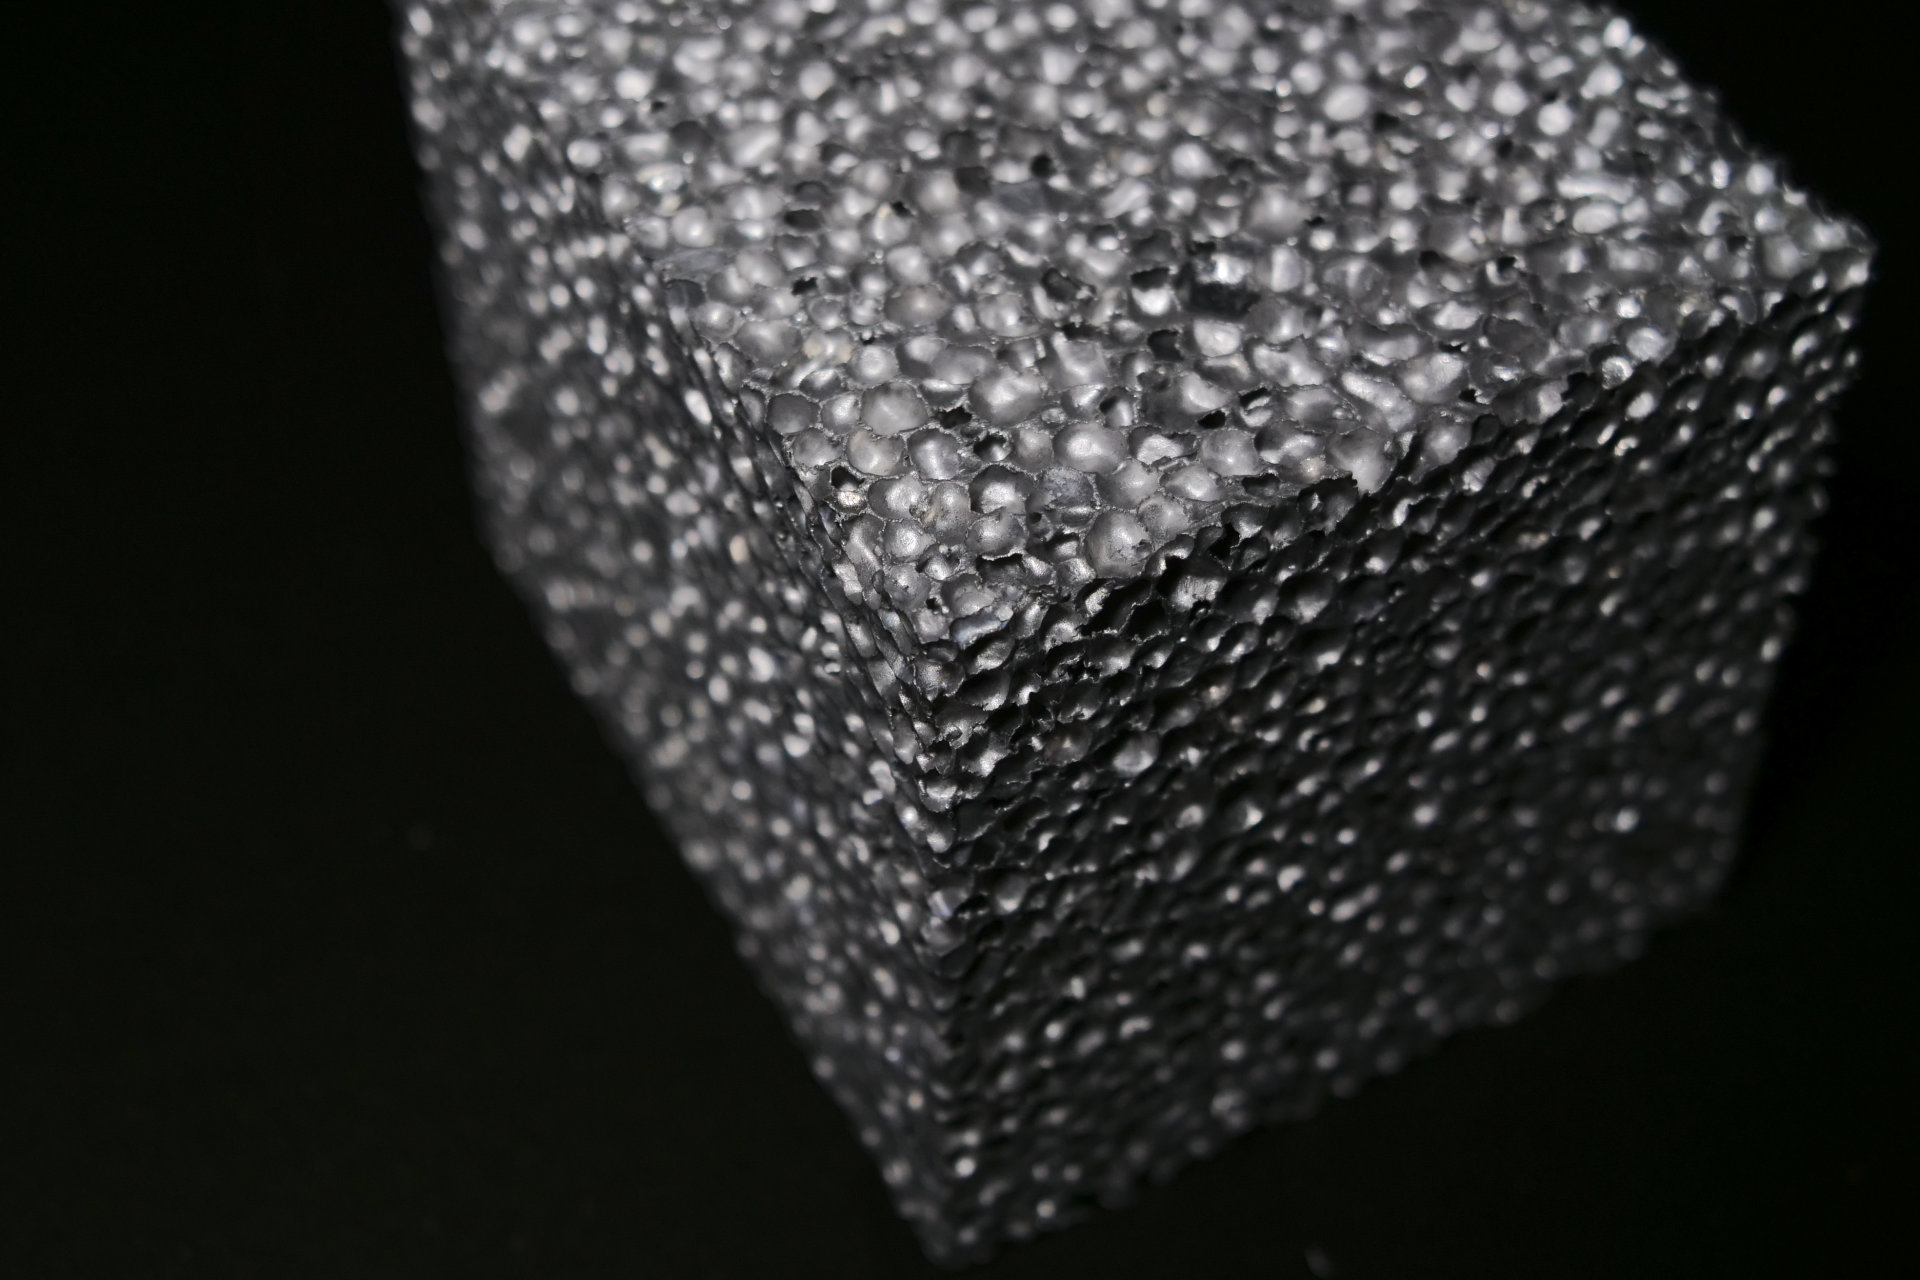 Which fields can the new foamed aluminum material be used for?